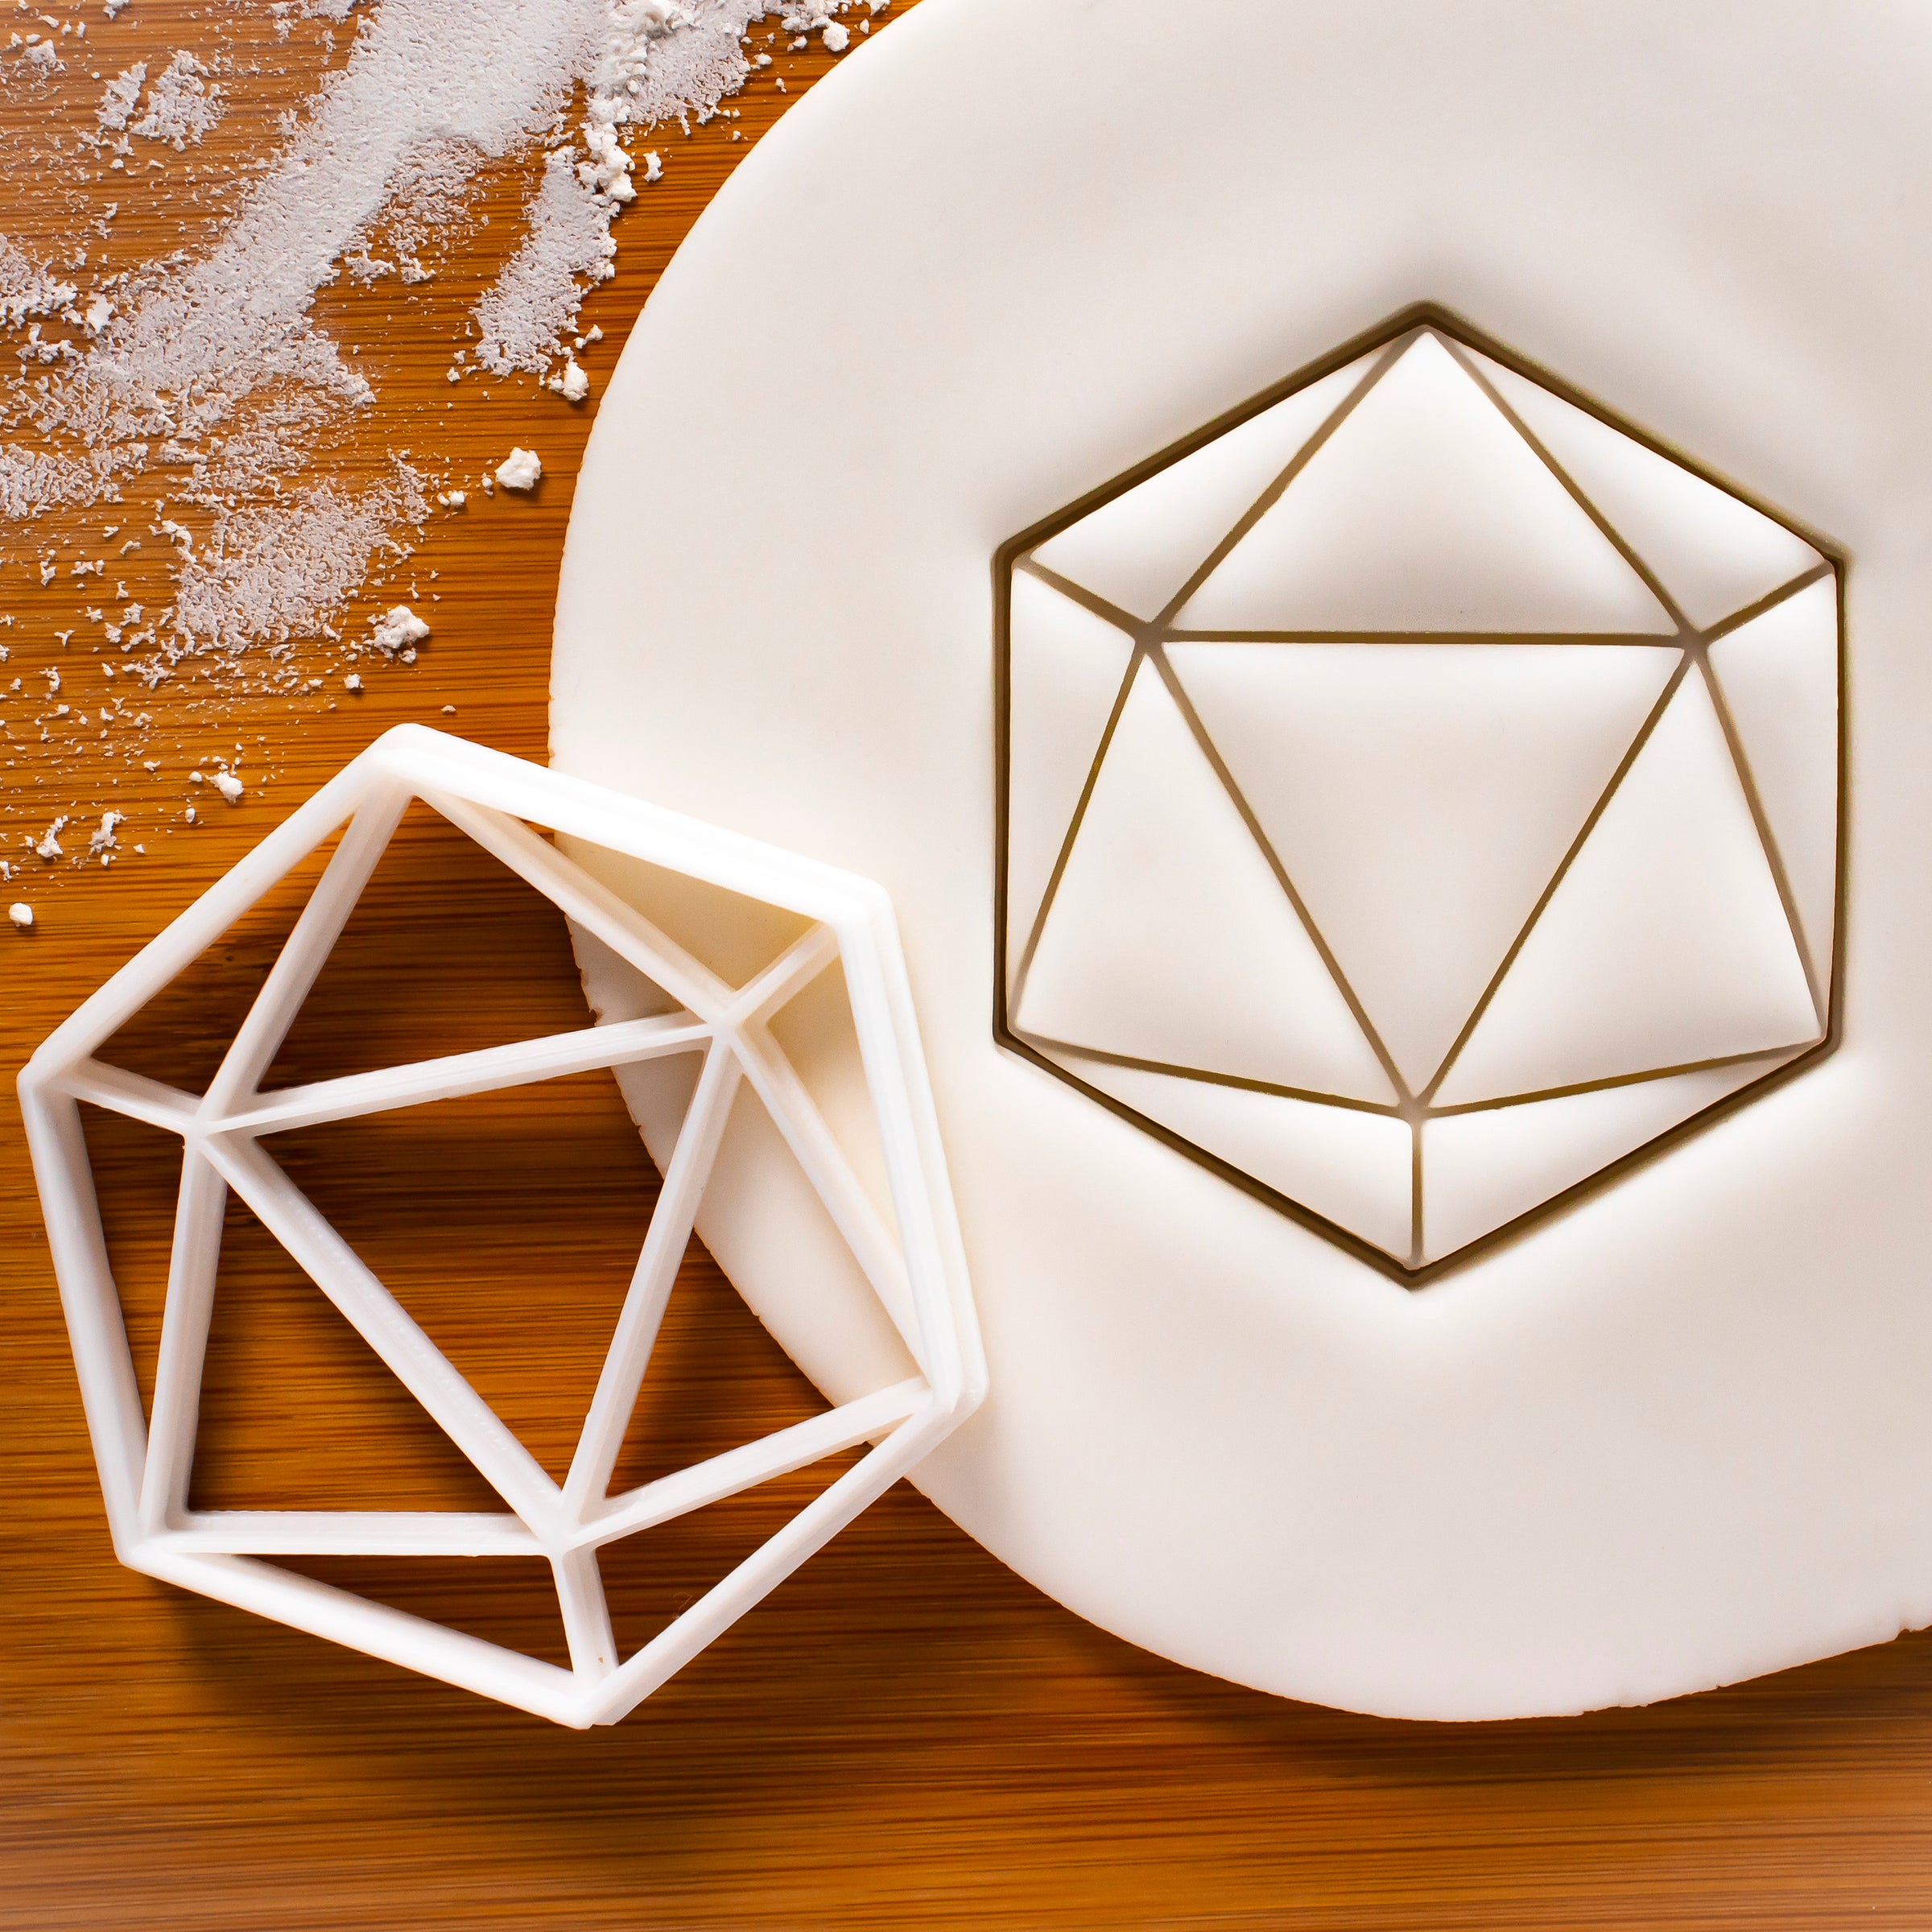 Icosahedron Cookie Cutter